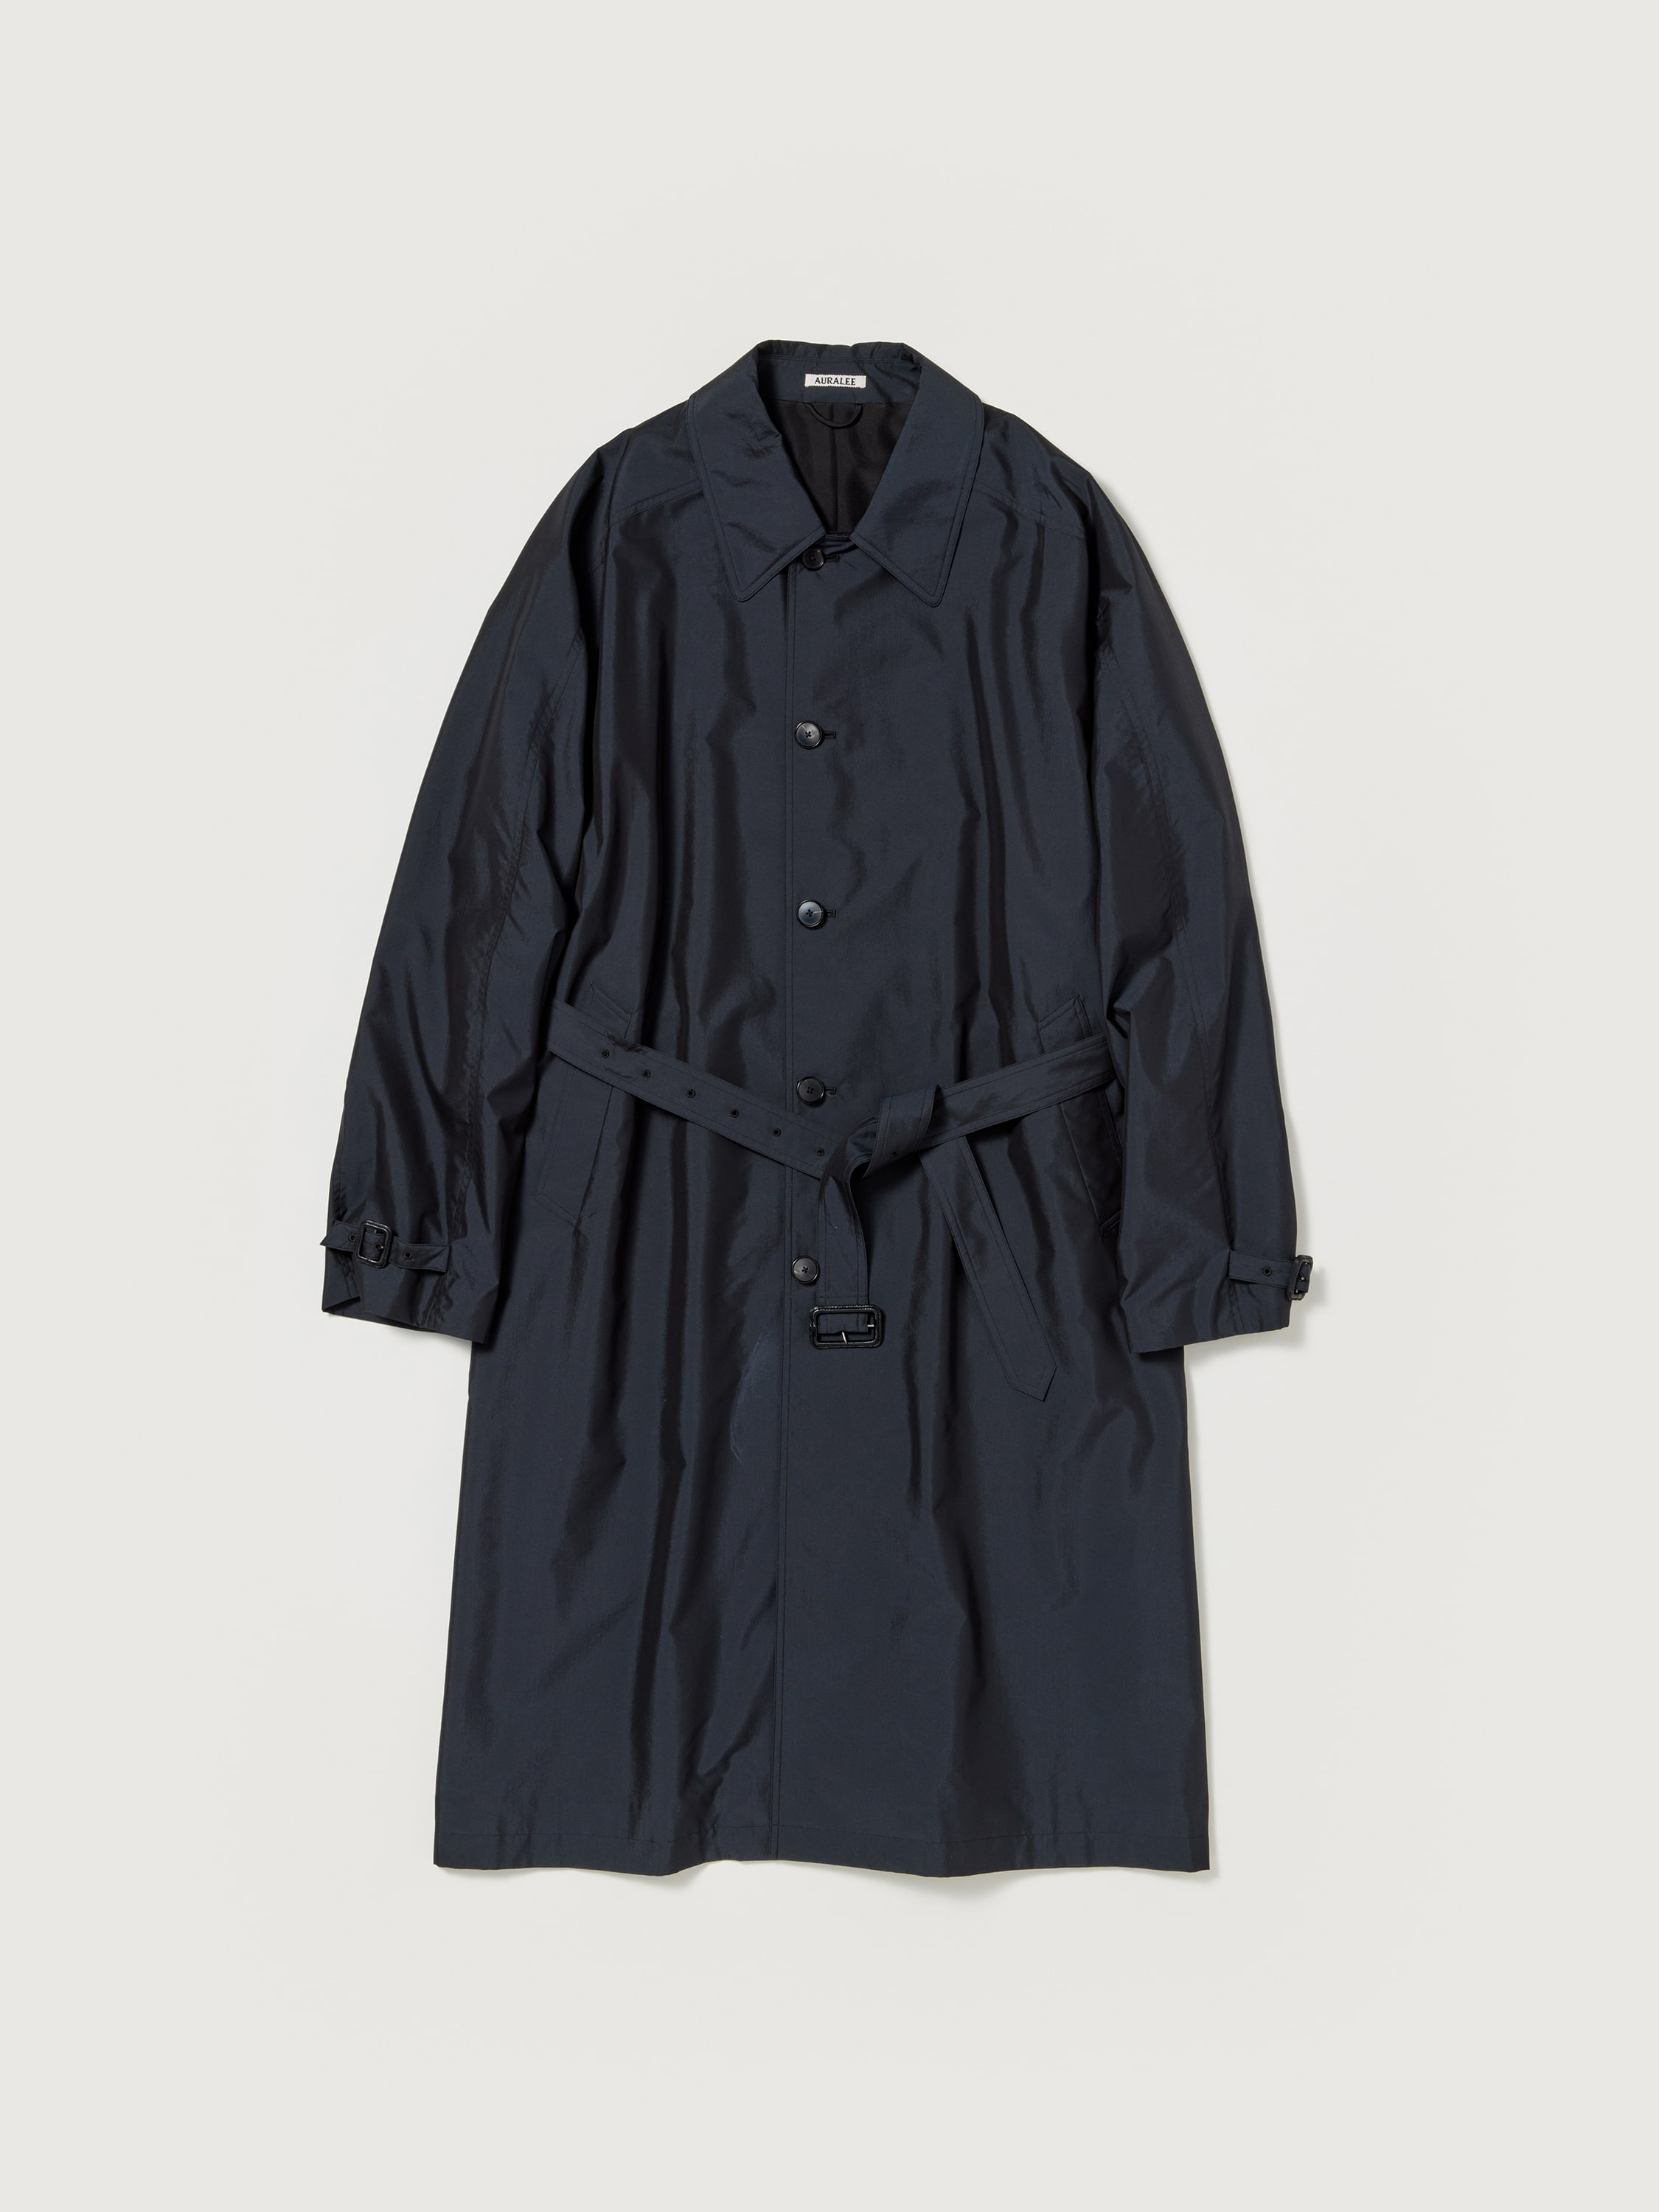 FINX POLYESTER WEATHER CHAMBRAY SOUTIEN COLLOAR COAT 詳細画像 BLACK CHAMBRAY 1